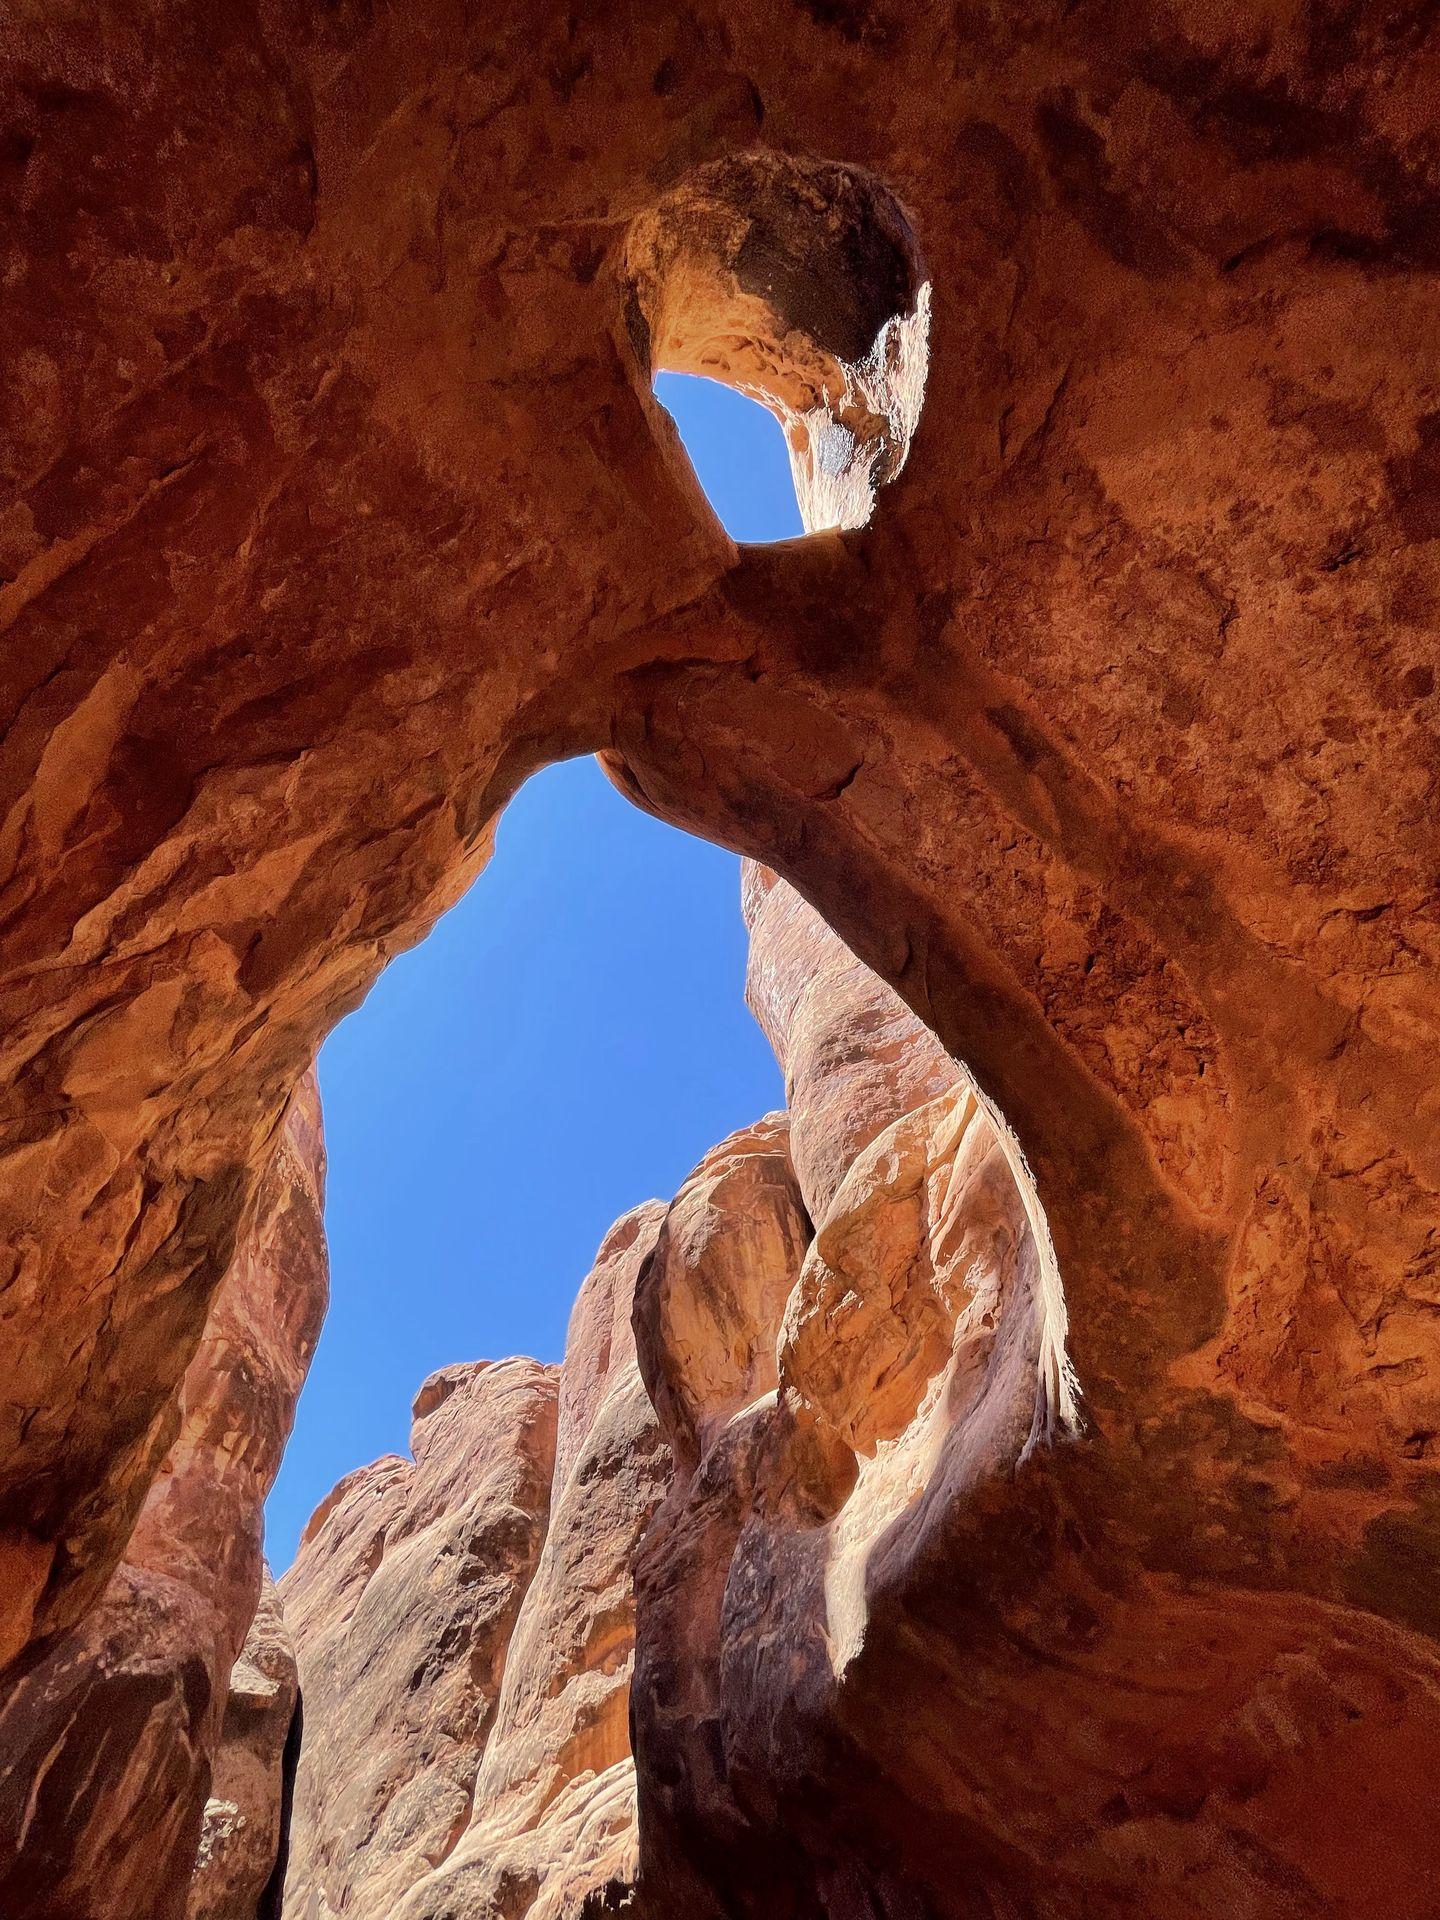 Looking up at a window inside of a cave on the Fiery Furnace trail